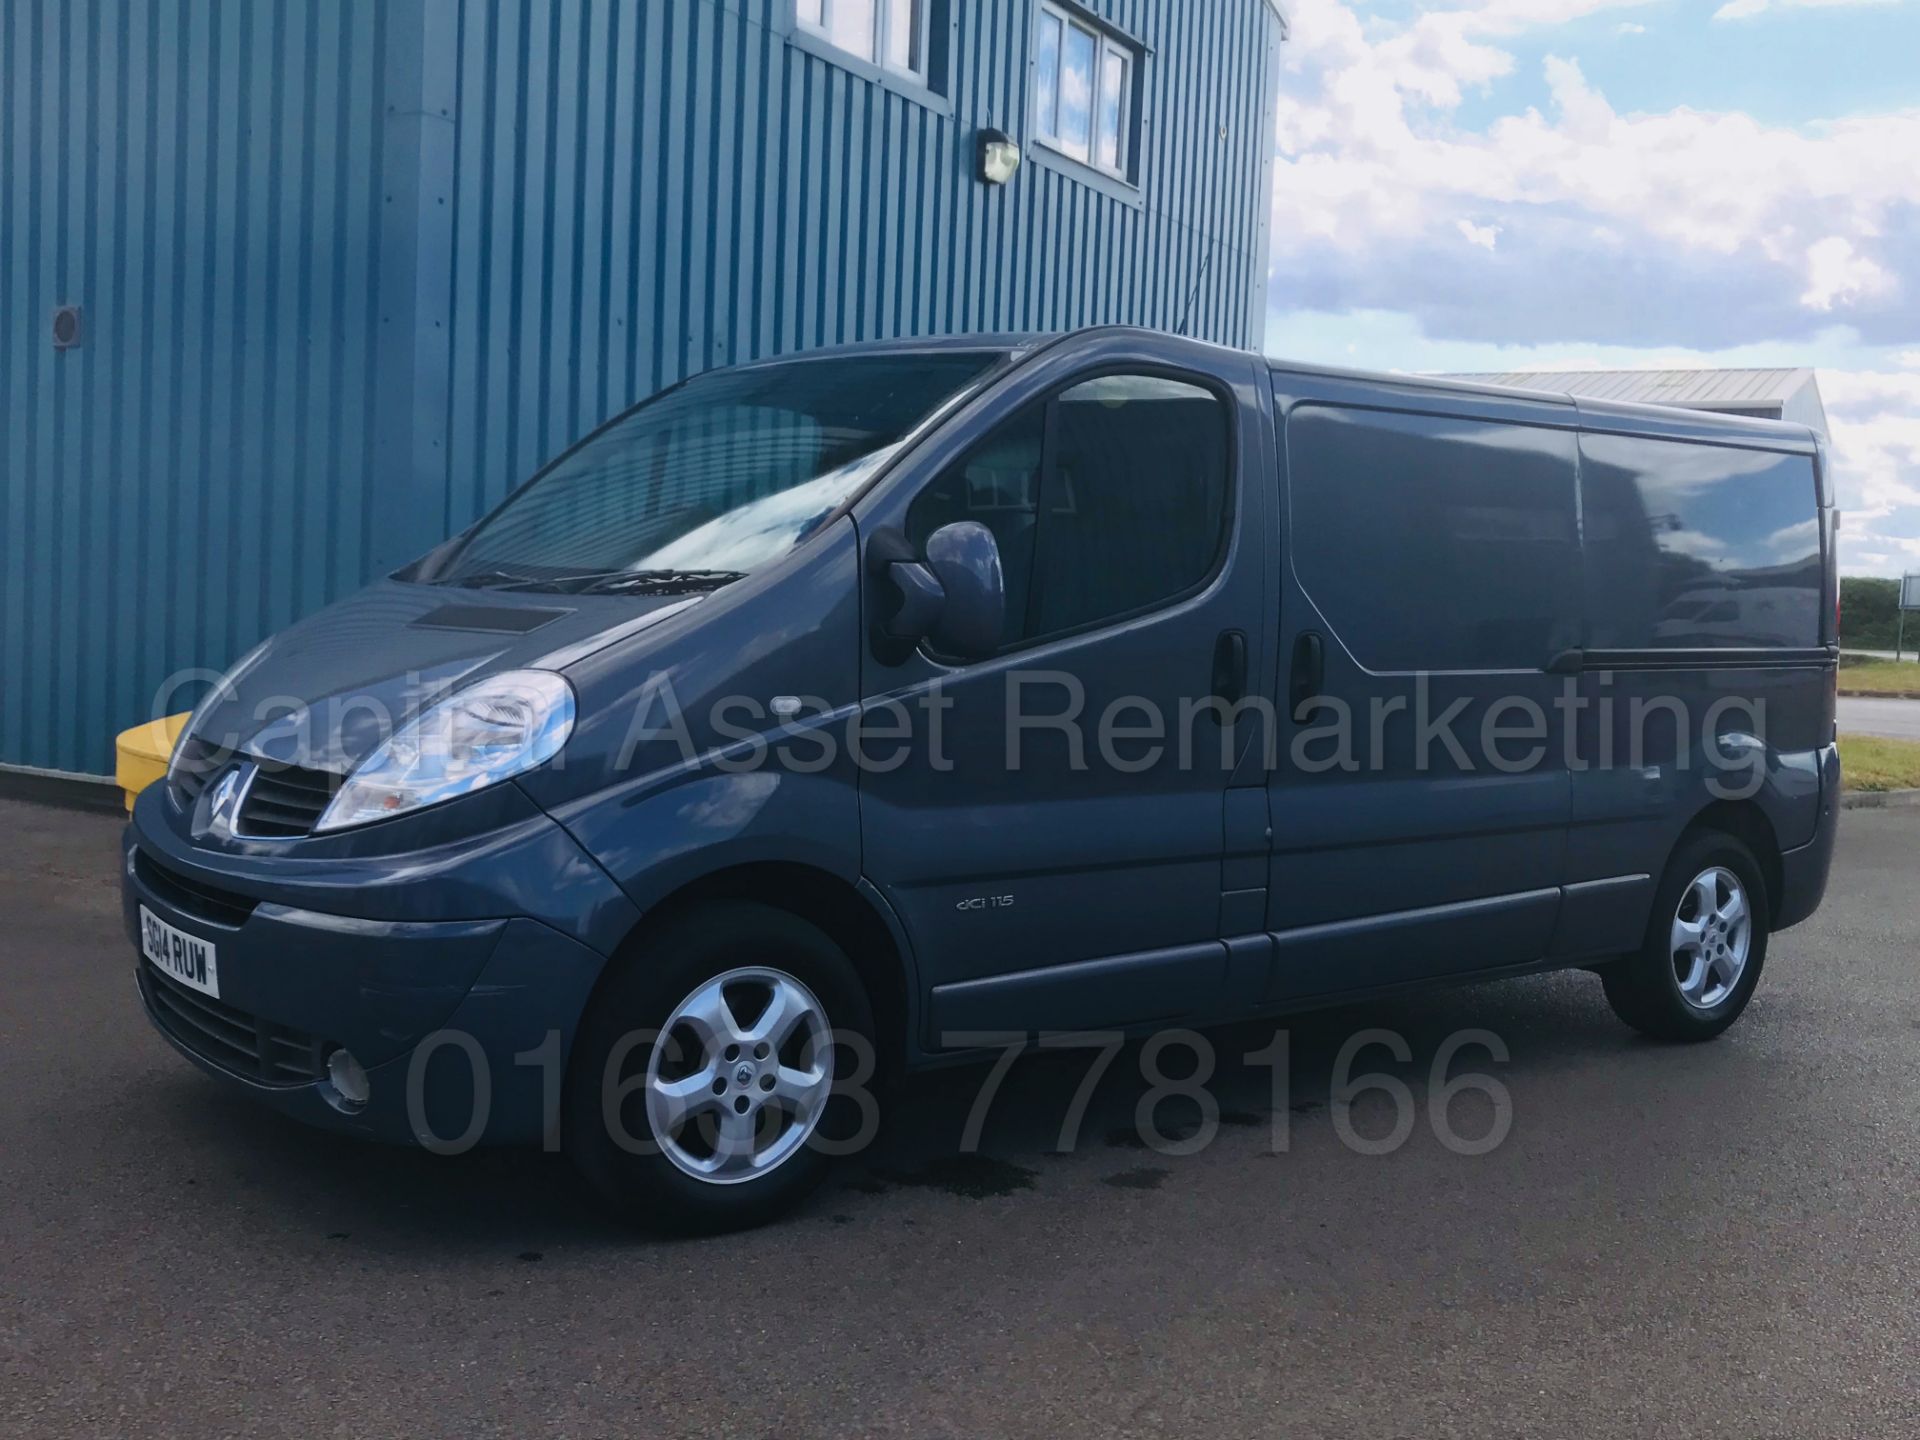 (On Sale) RENAULT TRAFIC 'SPORT EDITION' LWB (2014) '2.0 DCI - 115 BHP - 6 SPEED' *AIR CON* (NO VAT) - Image 2 of 40